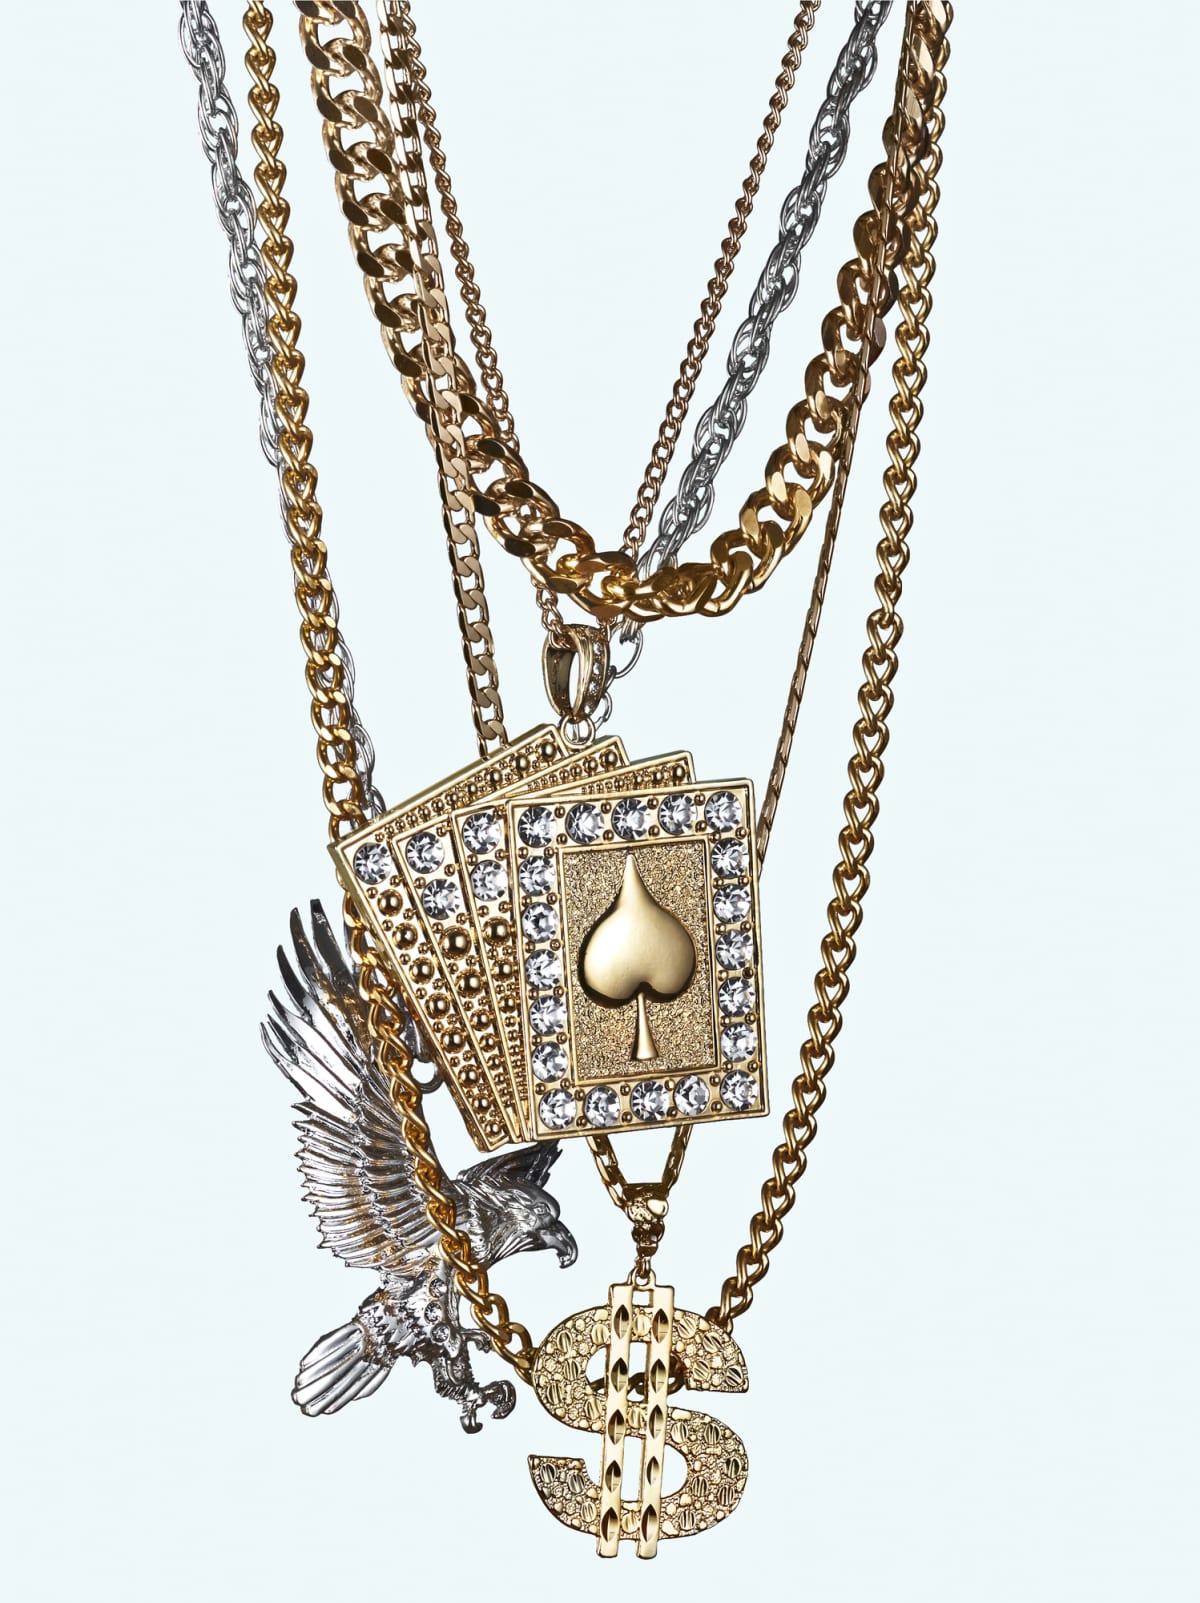 jewellery made from american symbols such as the american eagle, the dollar symbol and a deck of cards